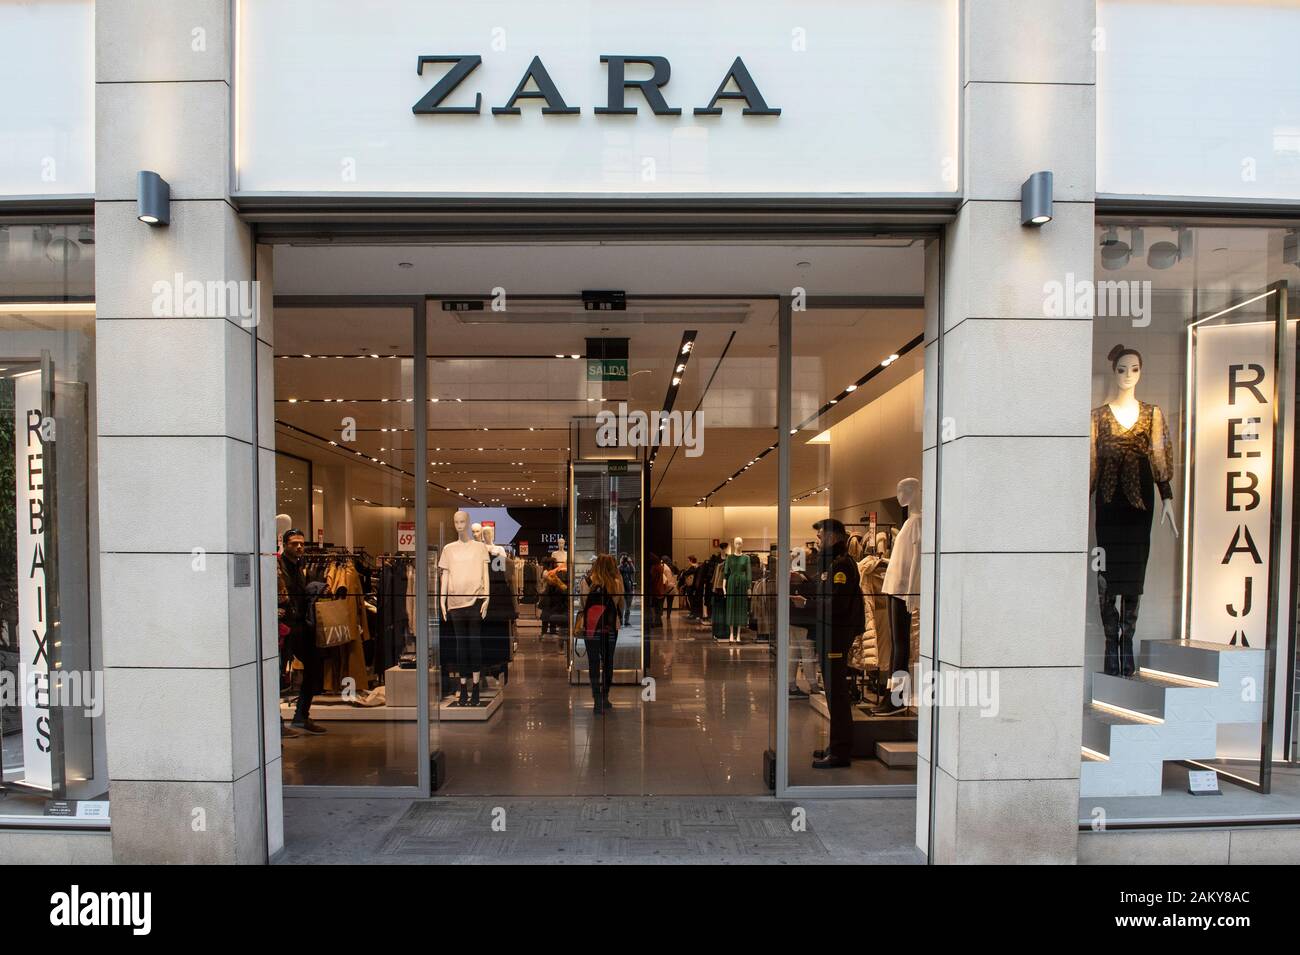 Spanish multinational clothing design retail company by Inditex, Zara store  seen in Spain Stock Photo - Alamy